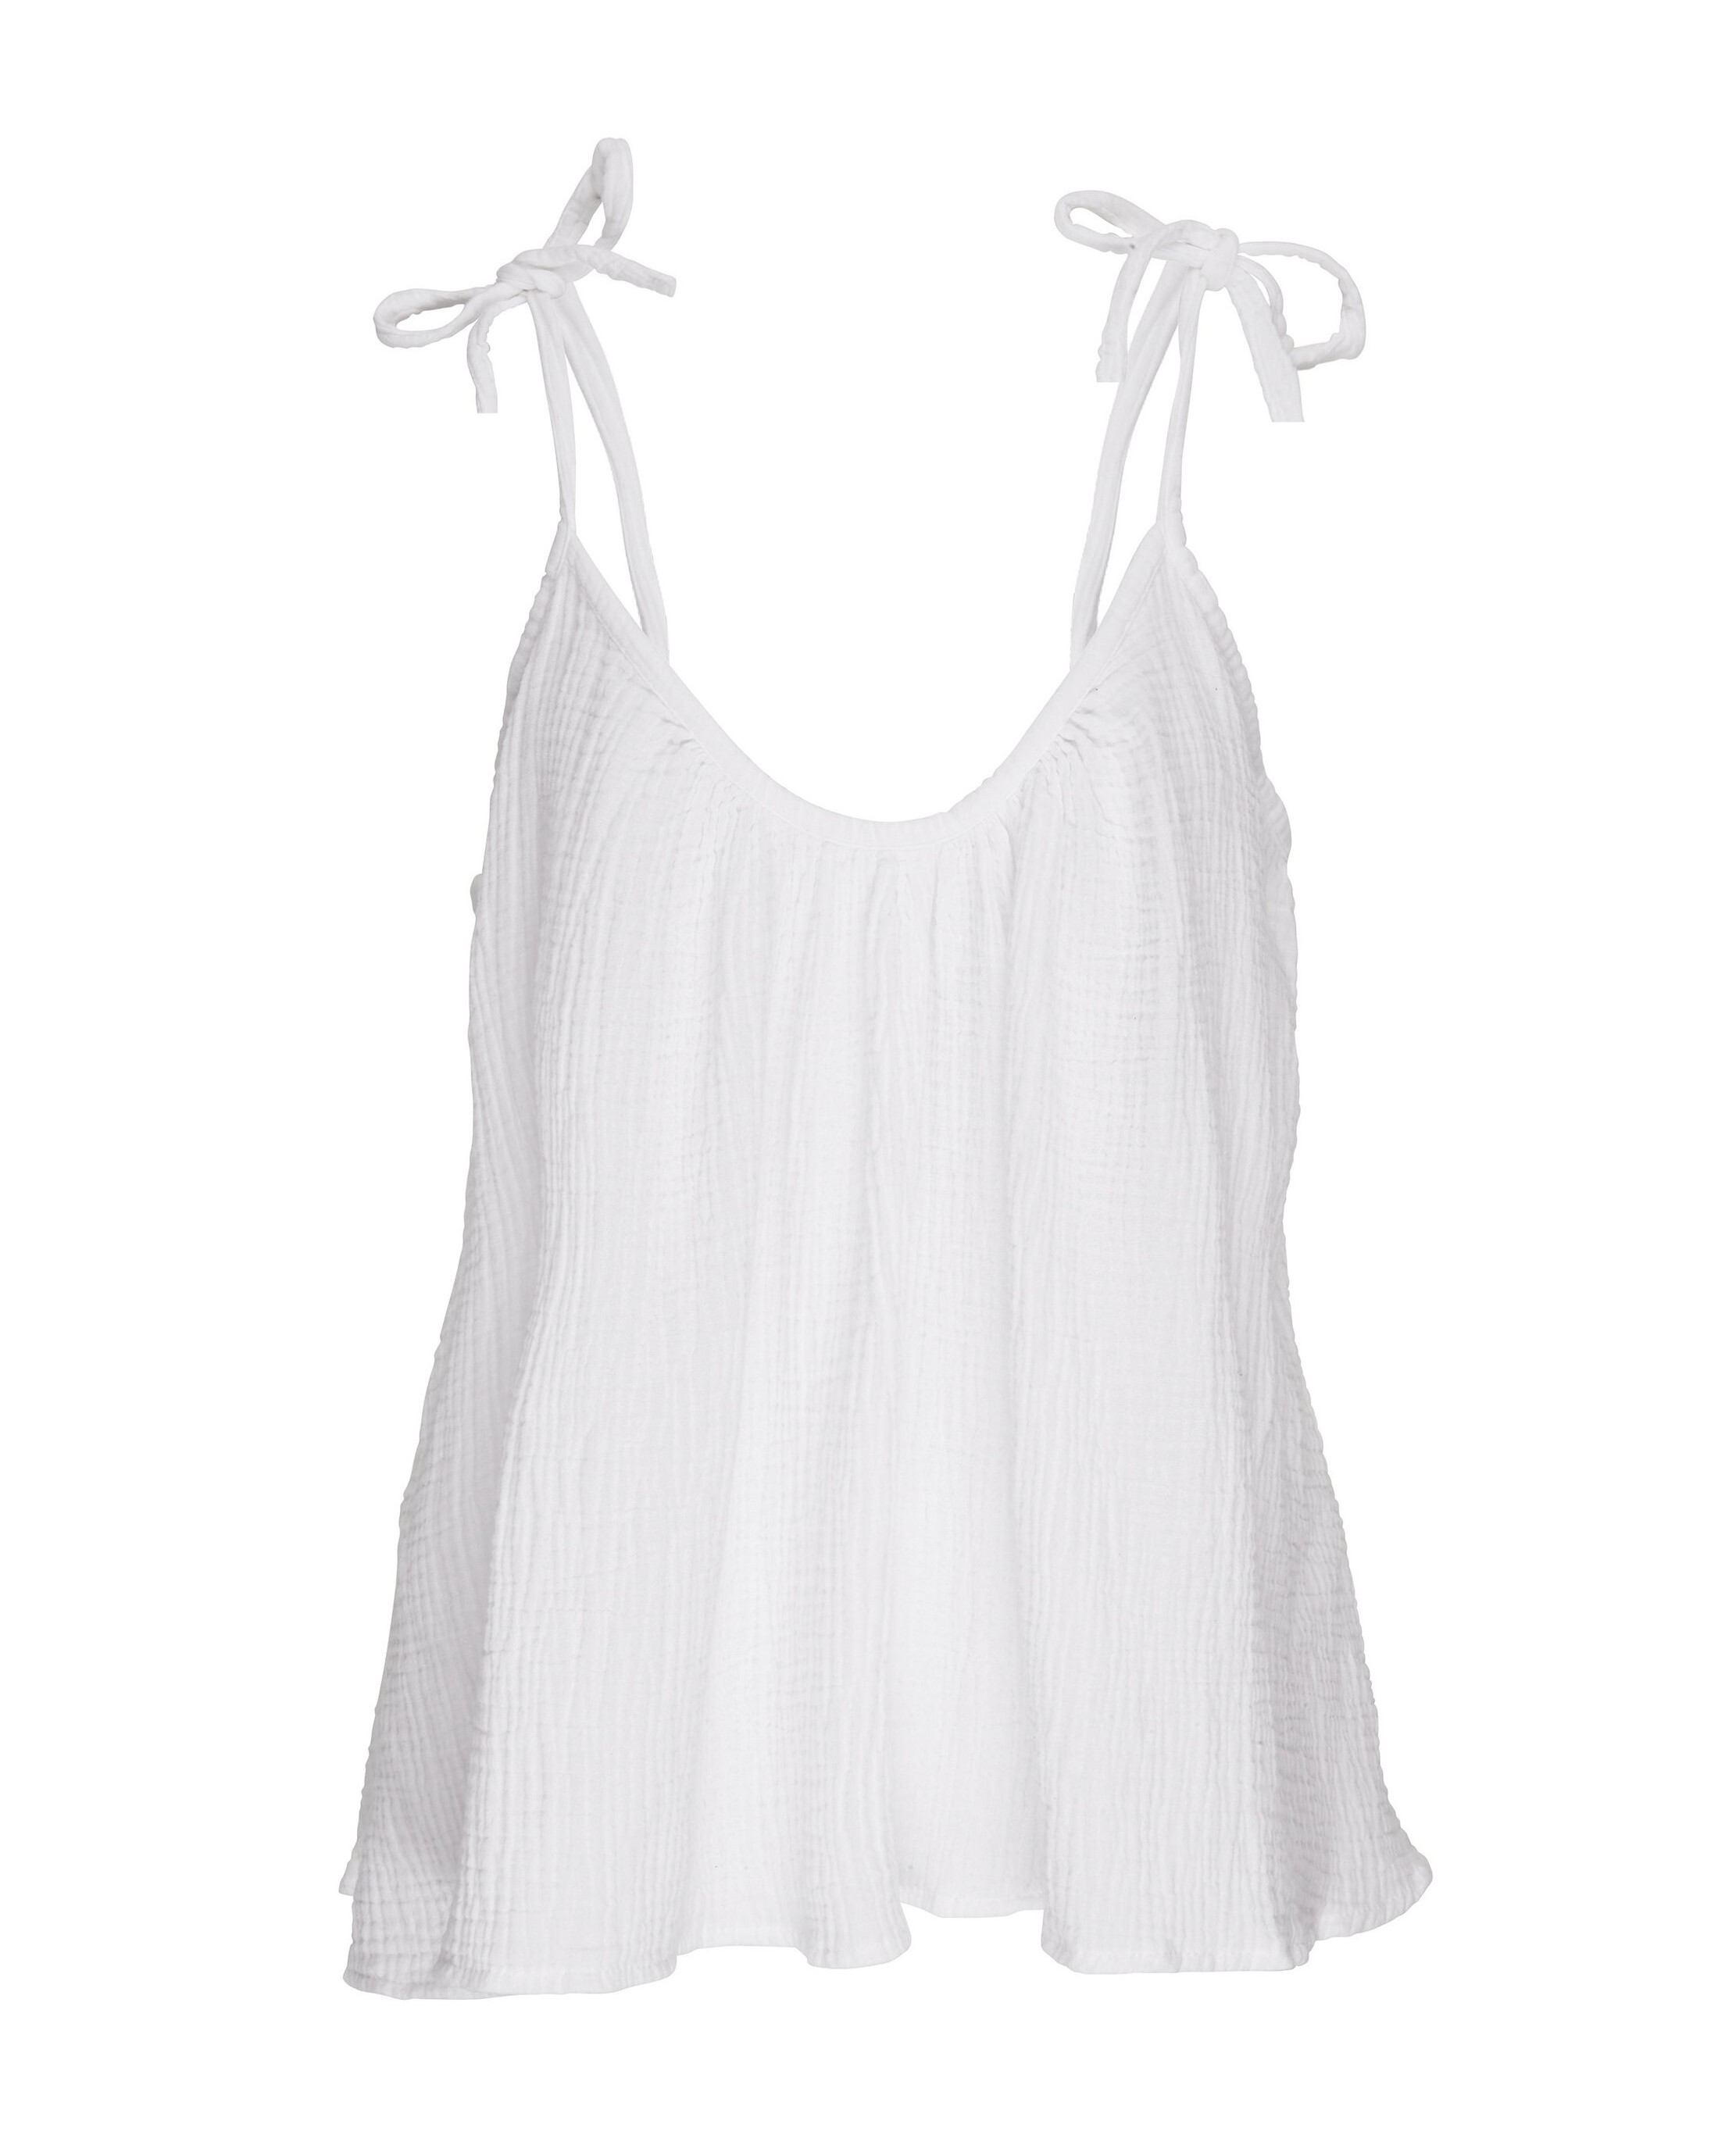 TIE ME LONGLINE CAMI (WHITE)- HONOUR APPAREL SUMMER 21 Boxing Day Sale